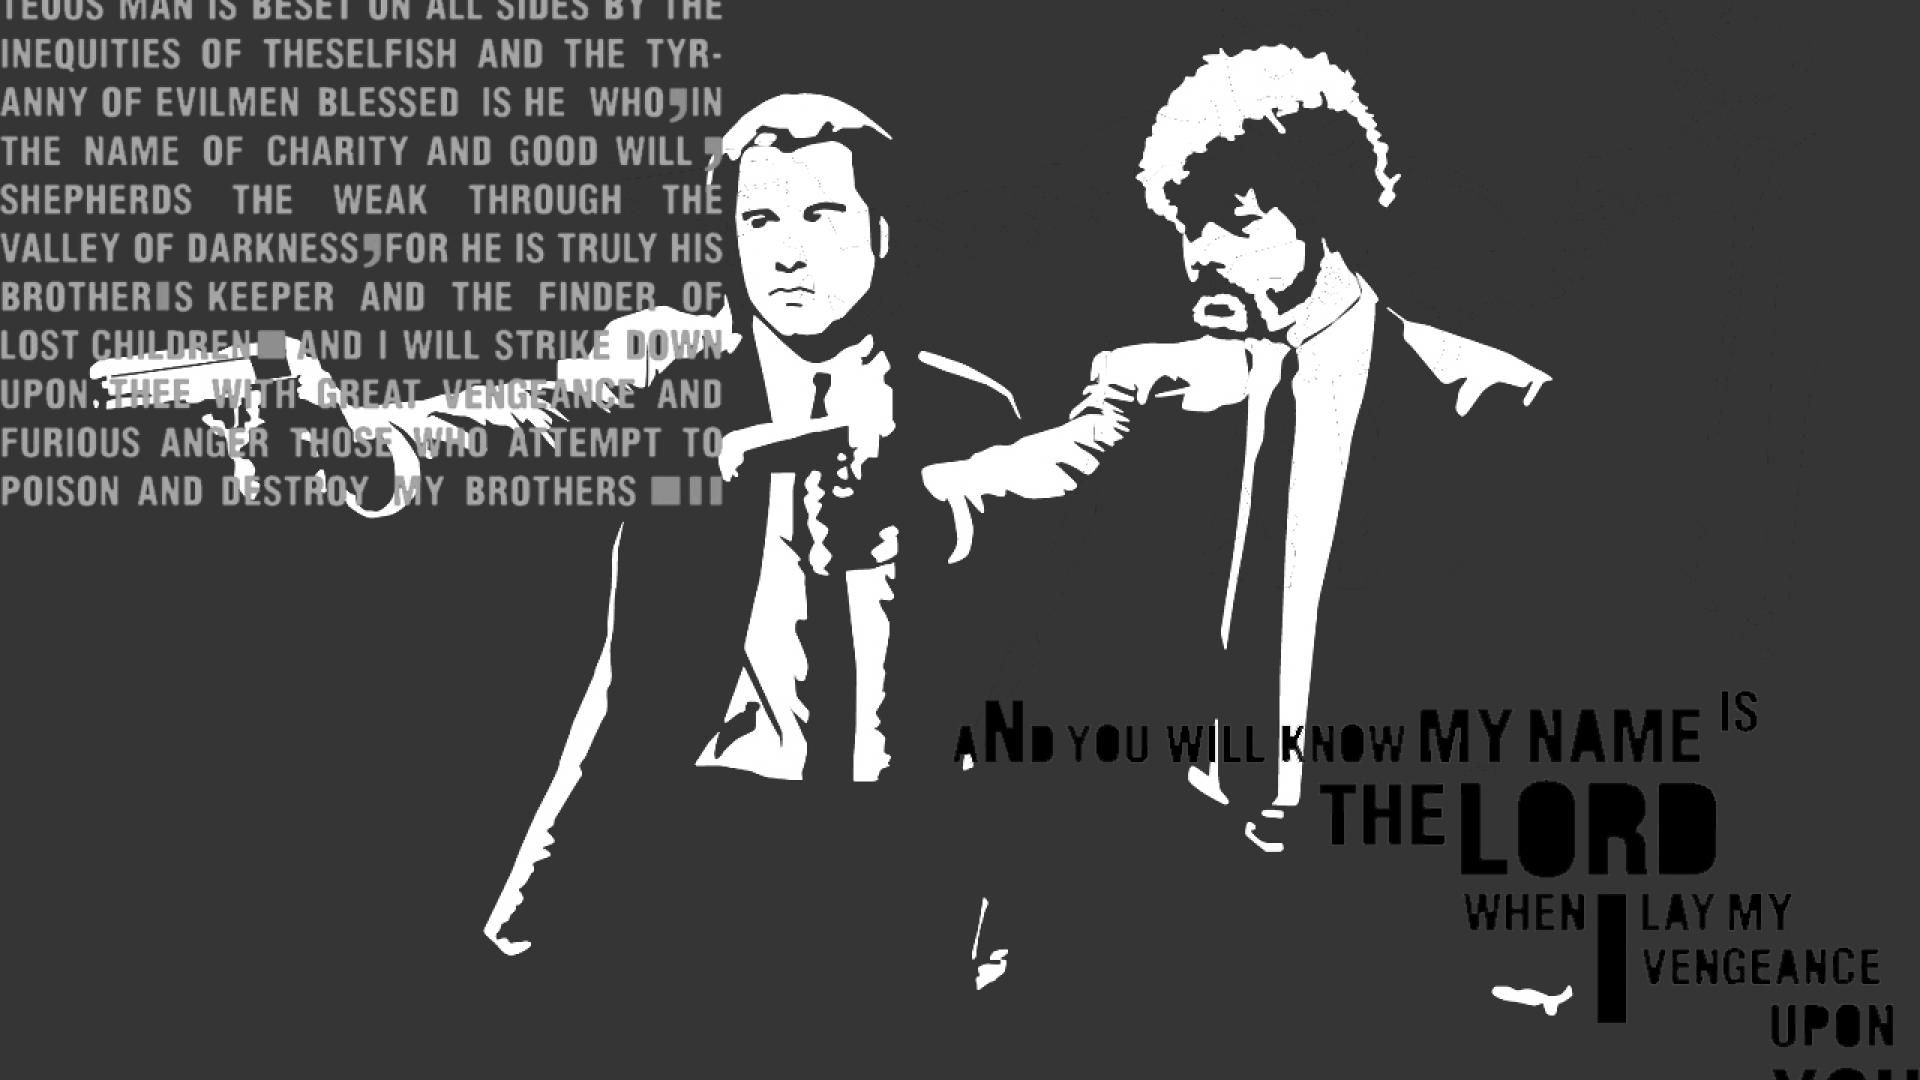 Pulp fiction quotes wallpaper - High Quality and other